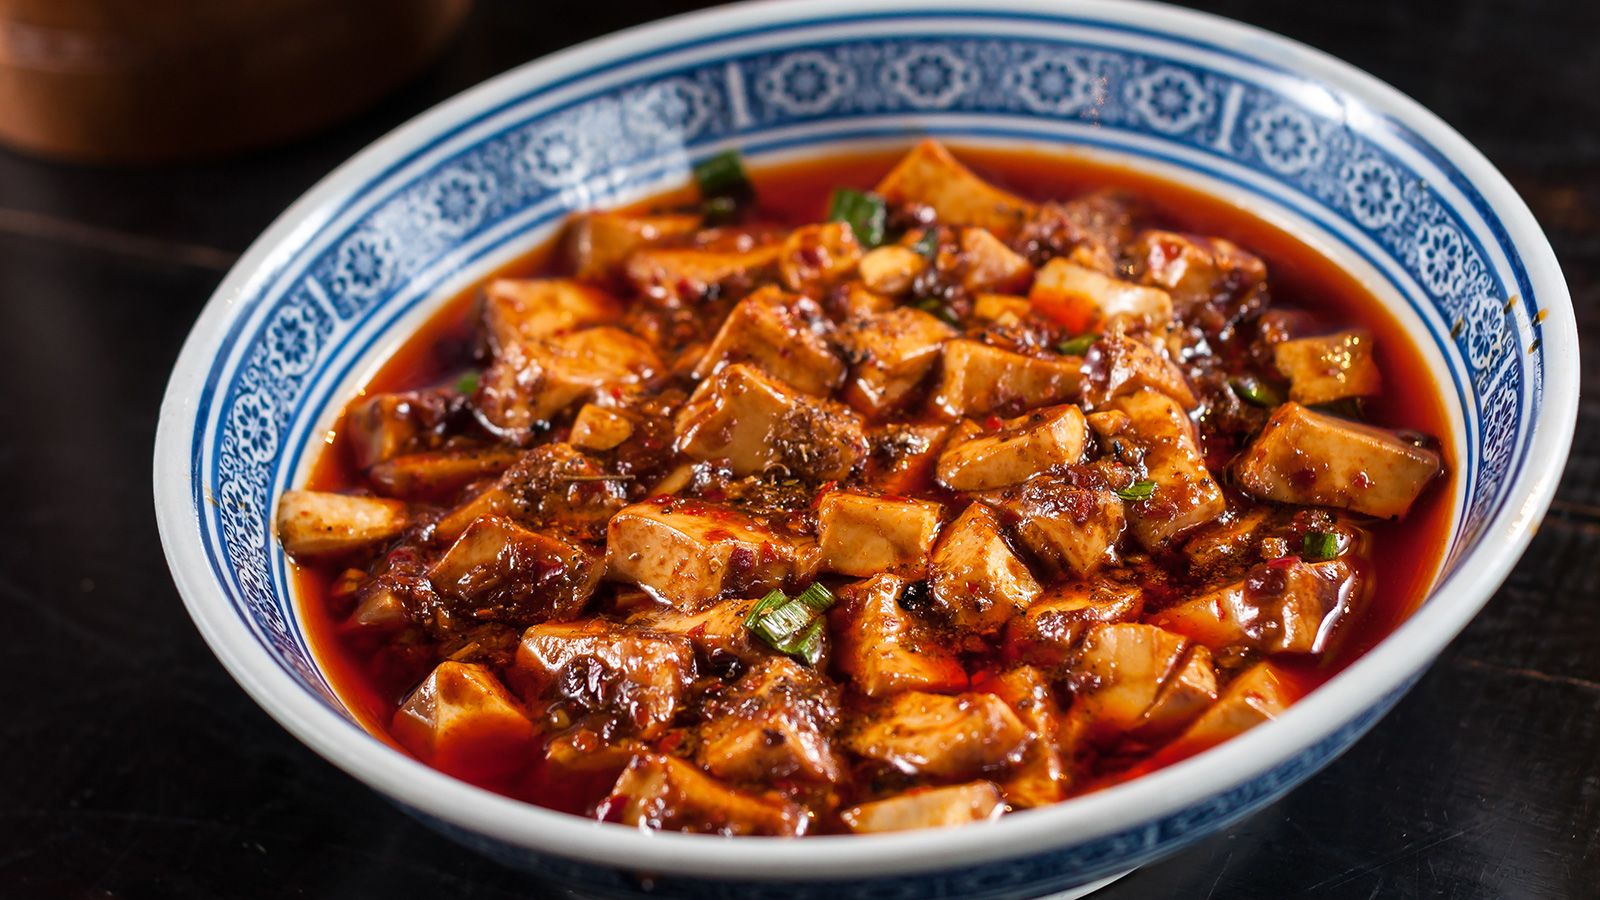 Why is Chinese cuisine the best?